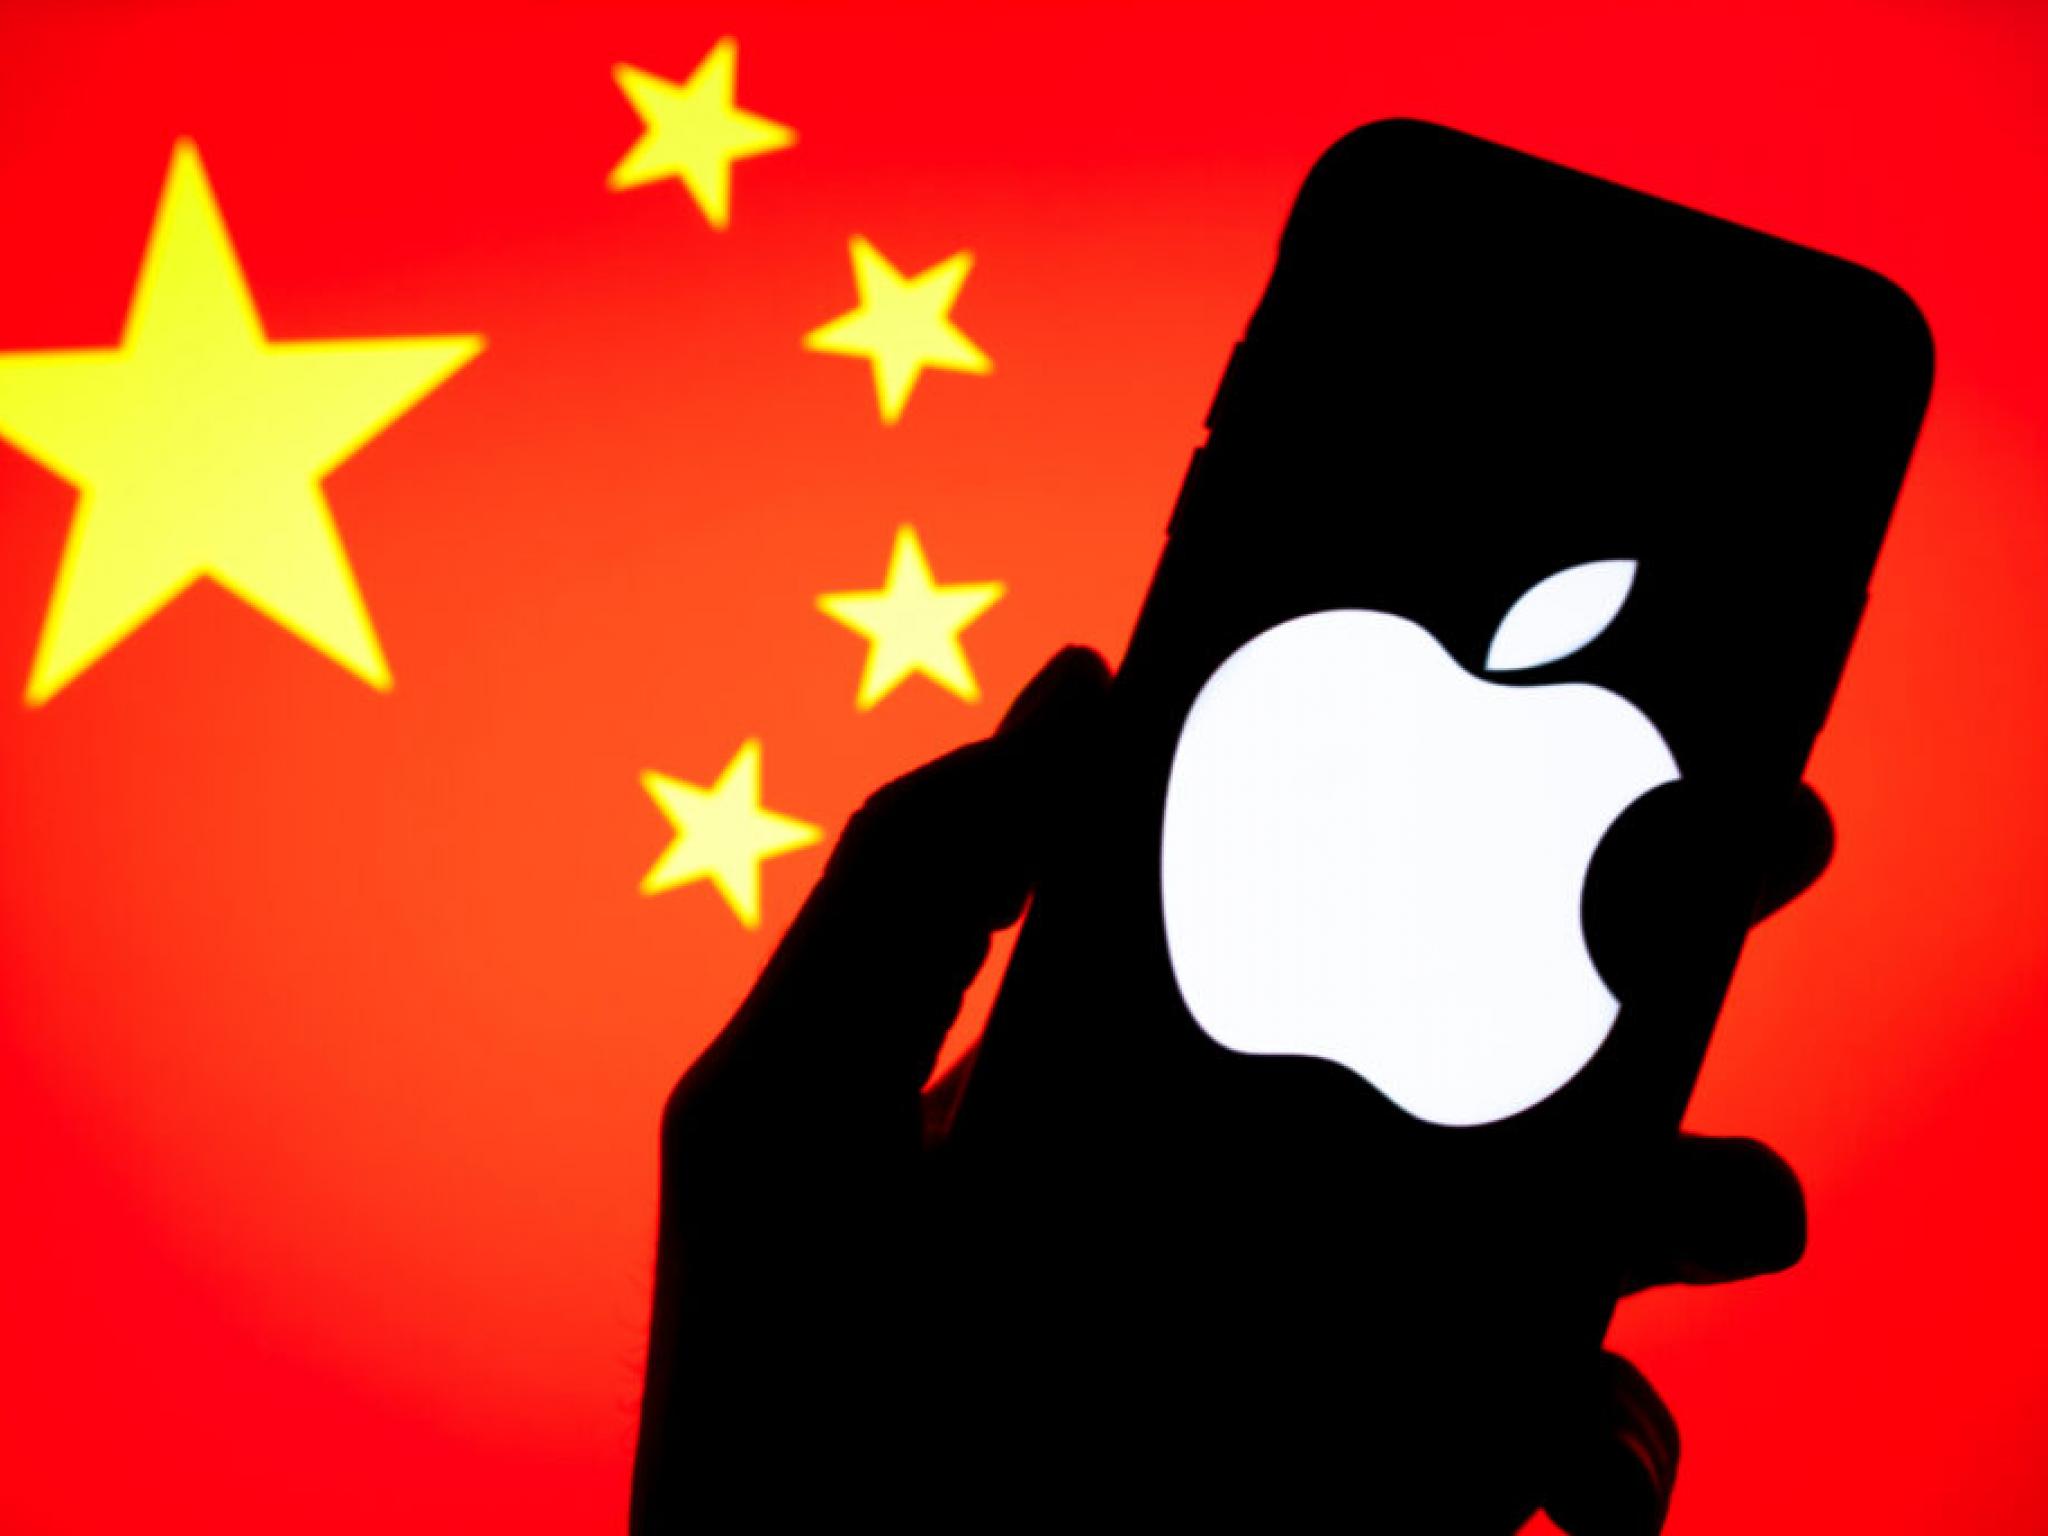  apples-china-market-challenge-analyst-attributes-iphone-shipments-decline-to-market-digestion 